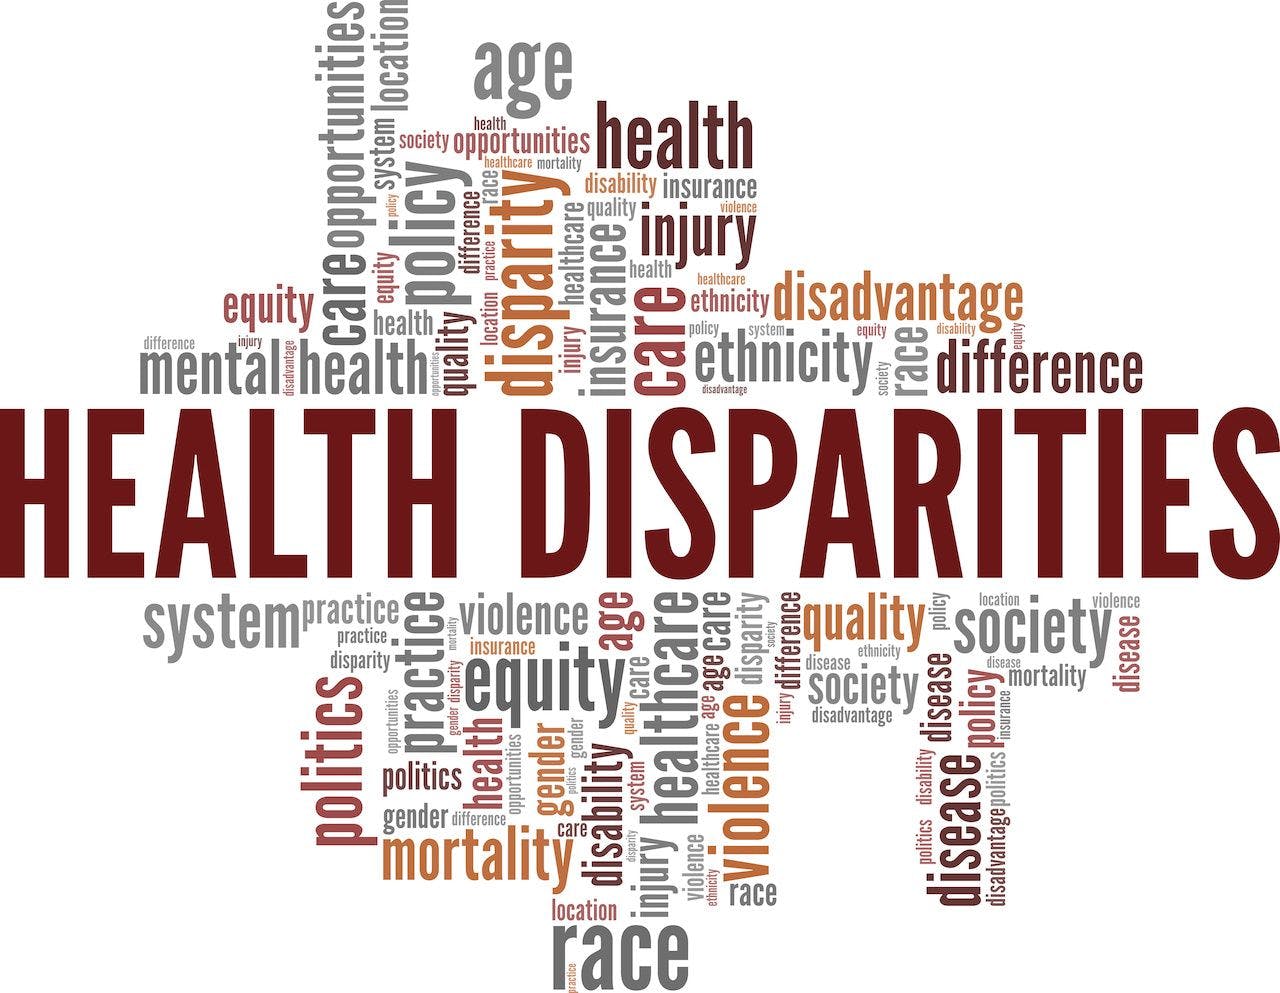 Health Disparities conceptual vector illustration word cloud isolated on white background: © Colored Lights - stock.adobe.com